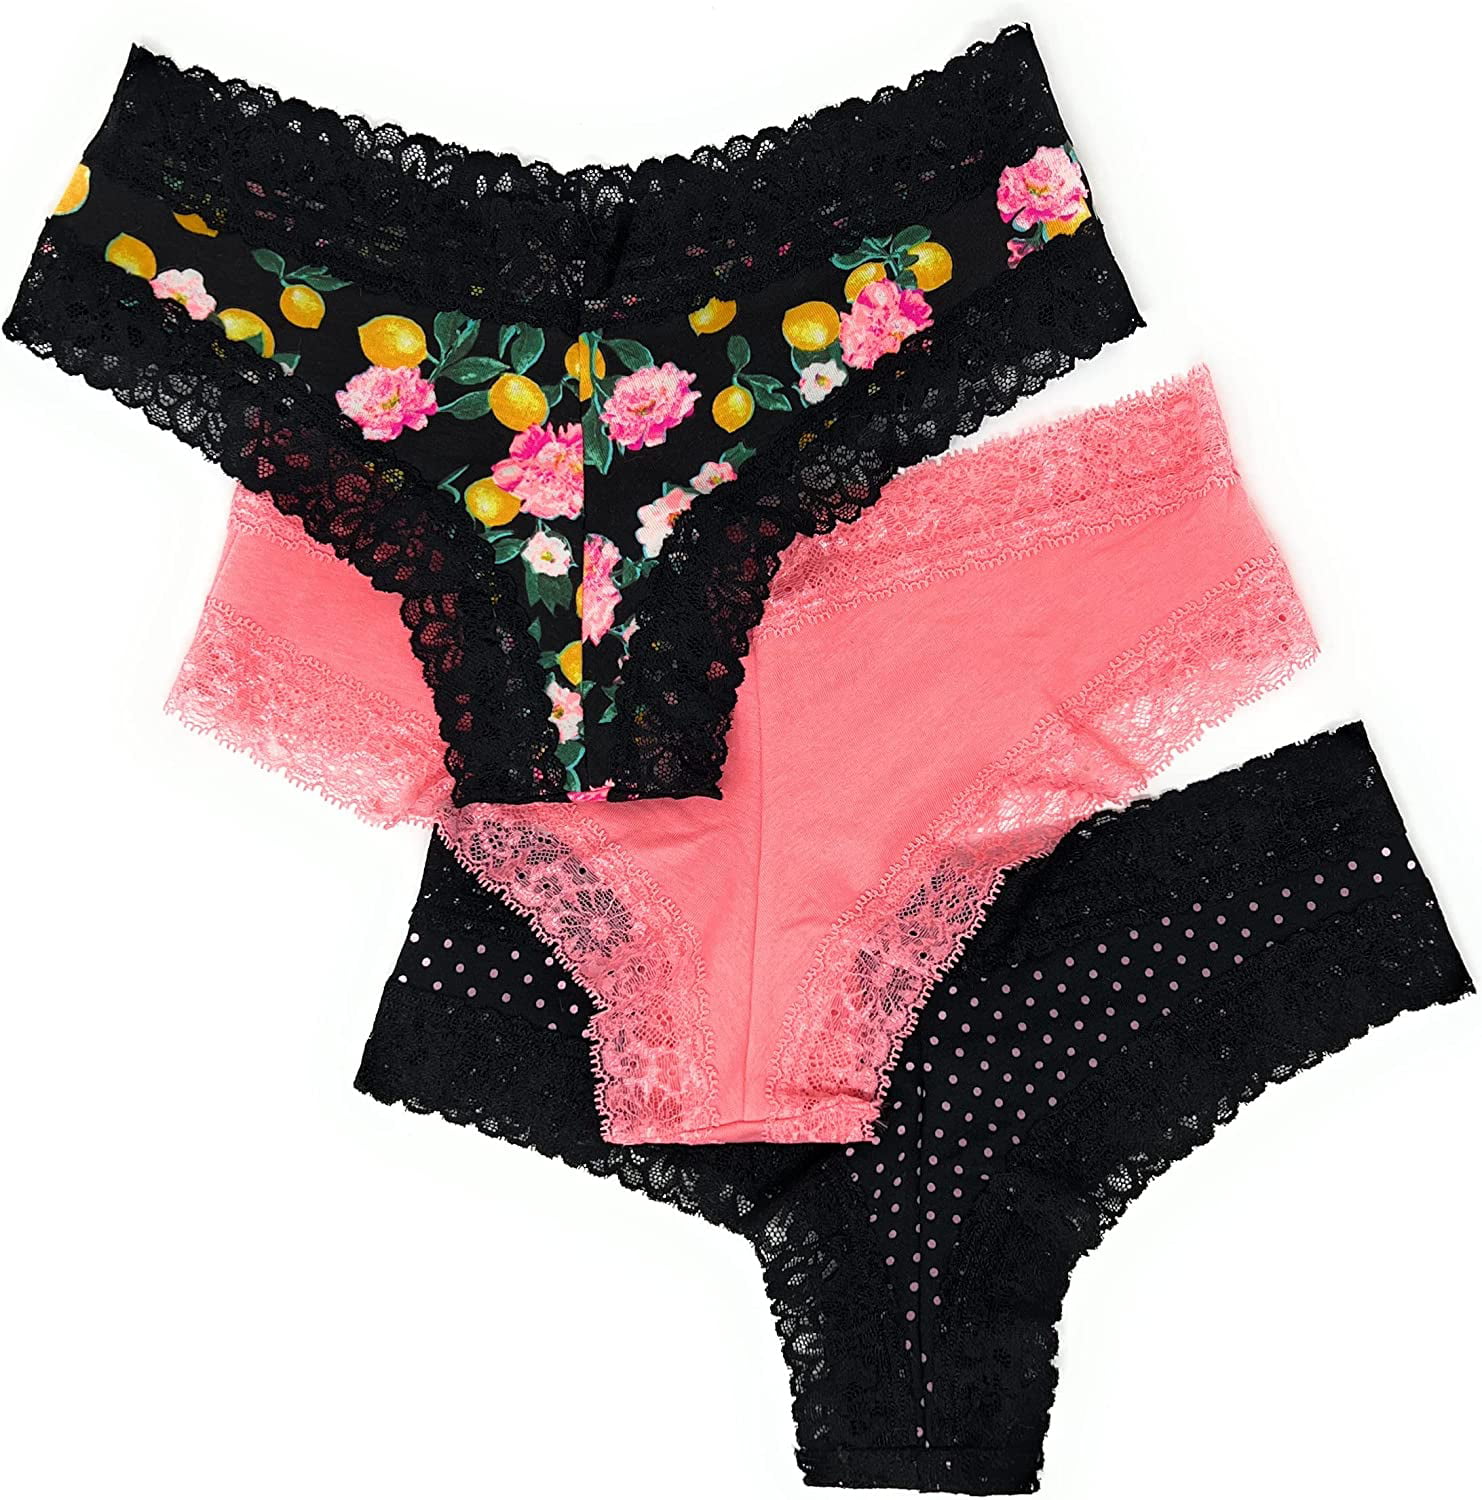 Buy Icon by Victoria's Secret Lace Cheeky Panty Online